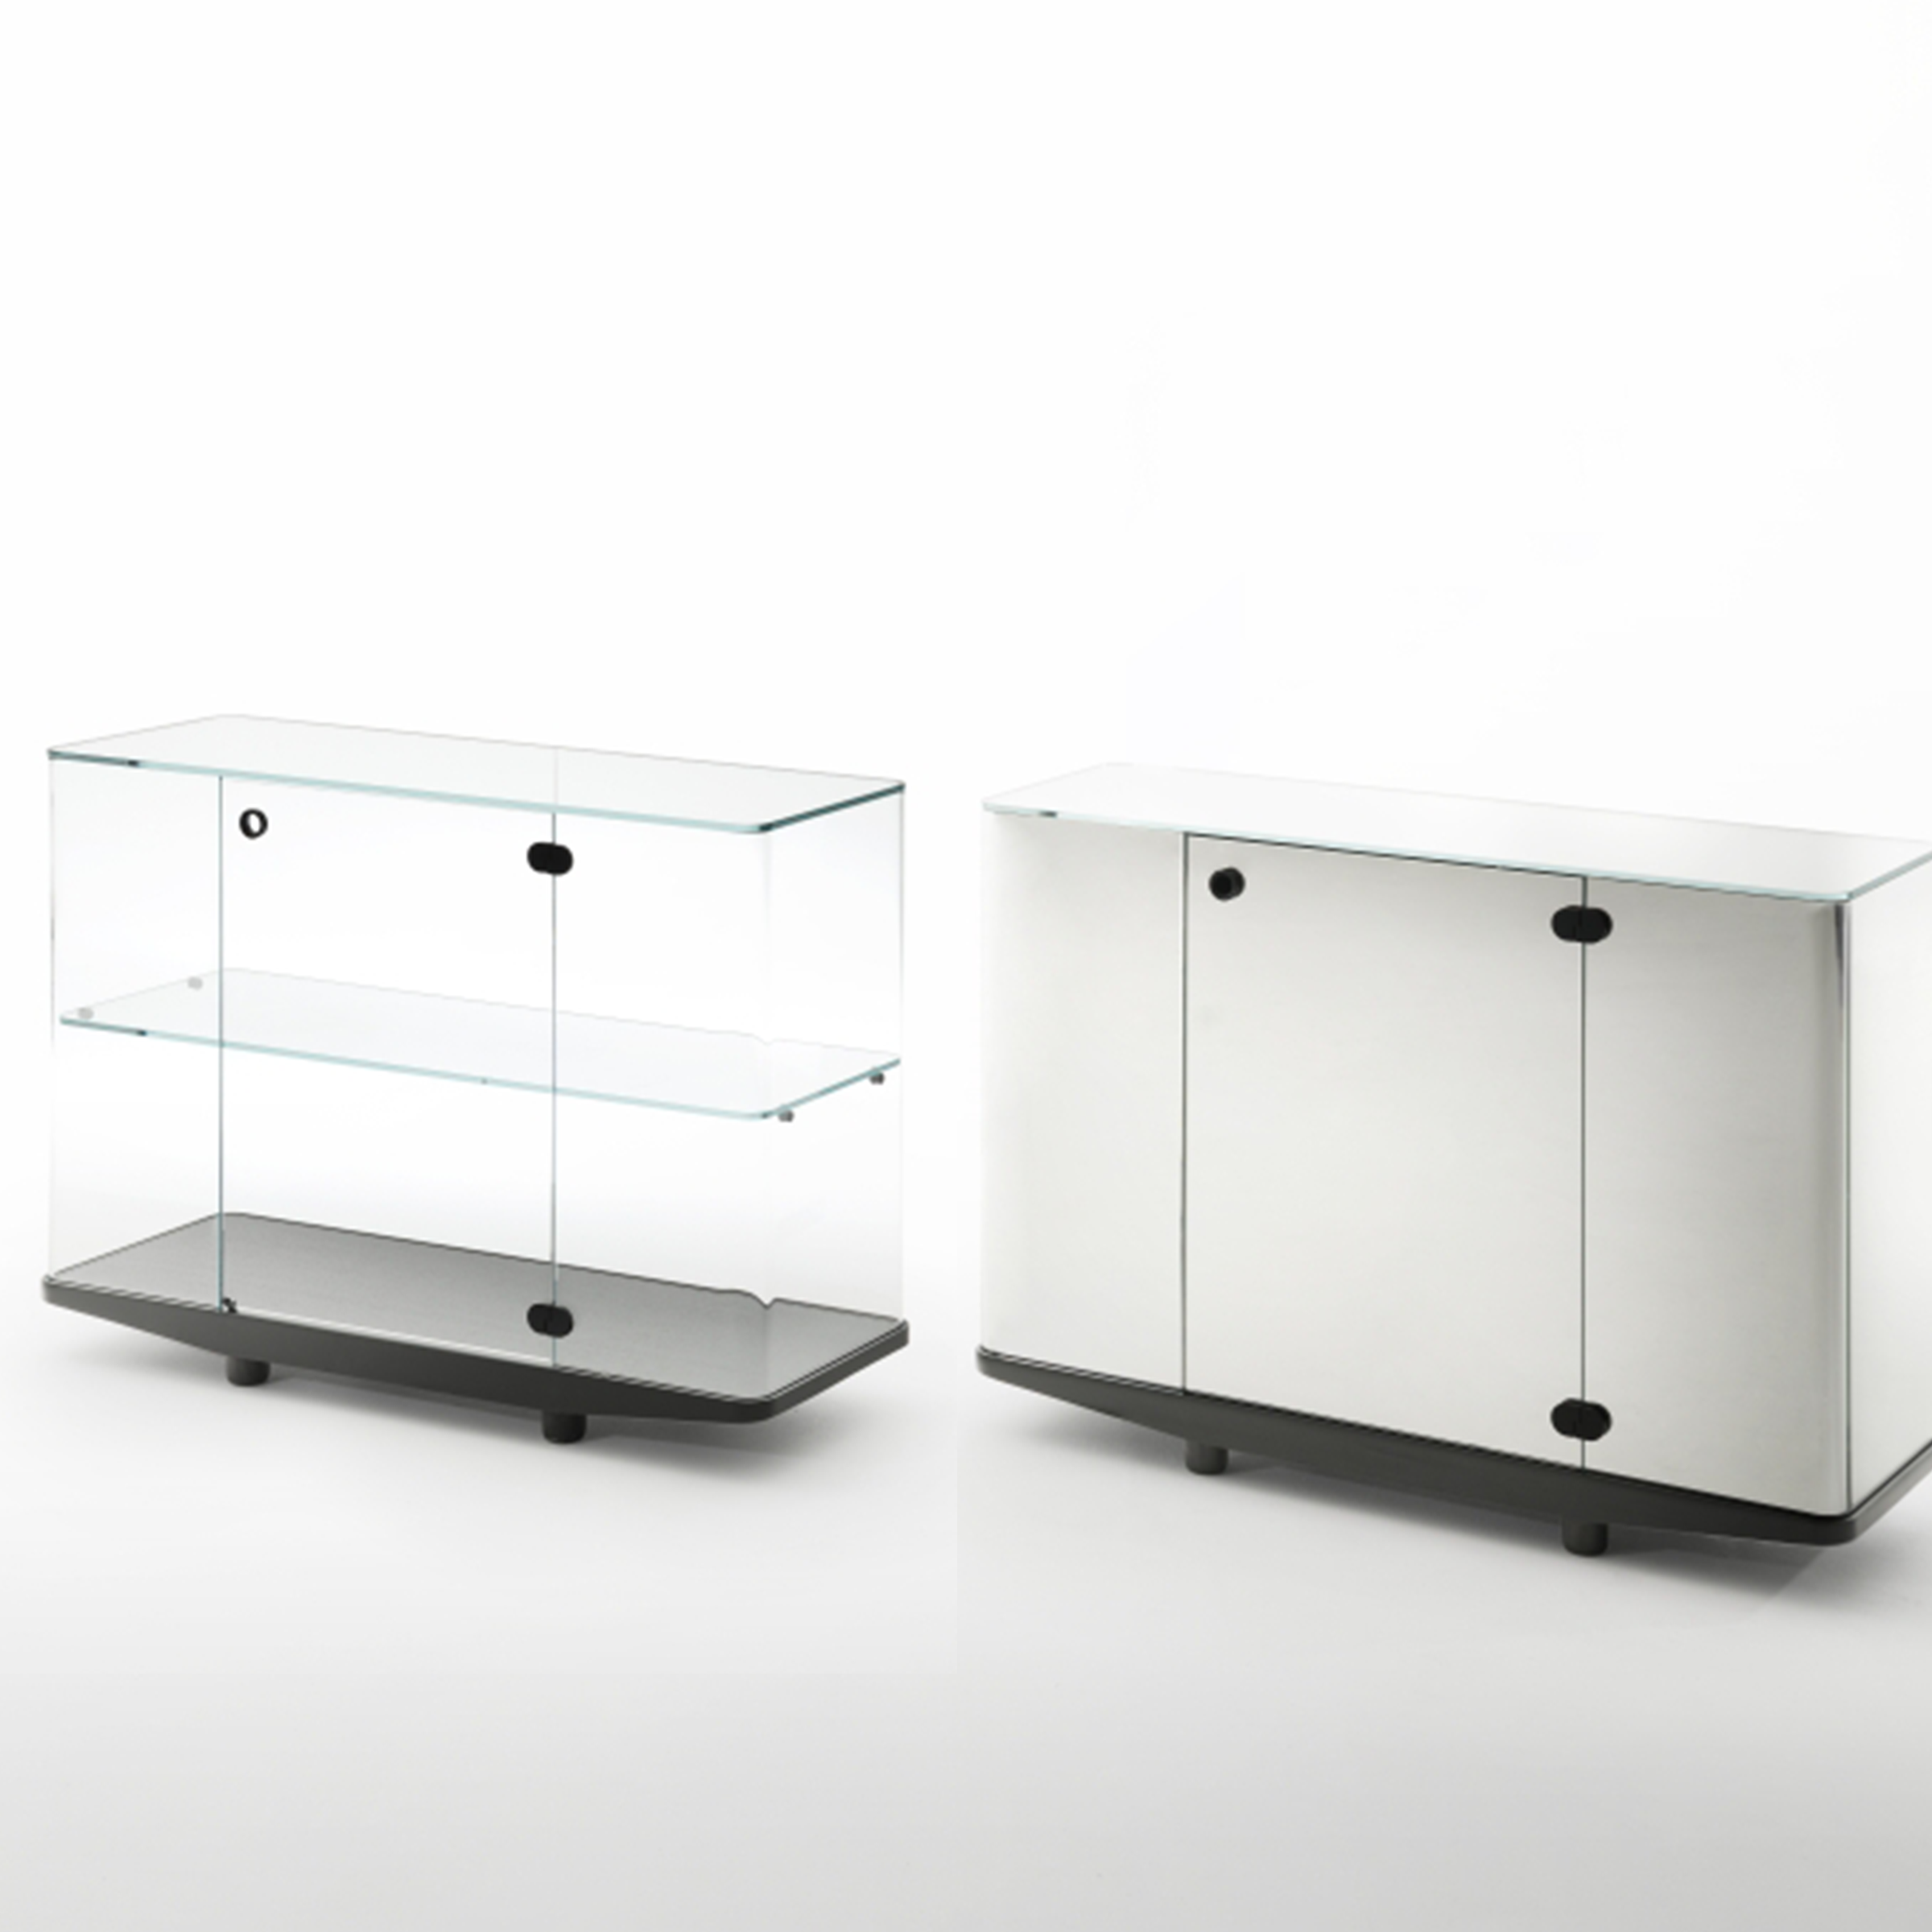 collector by barber & osgerby for glas italia.